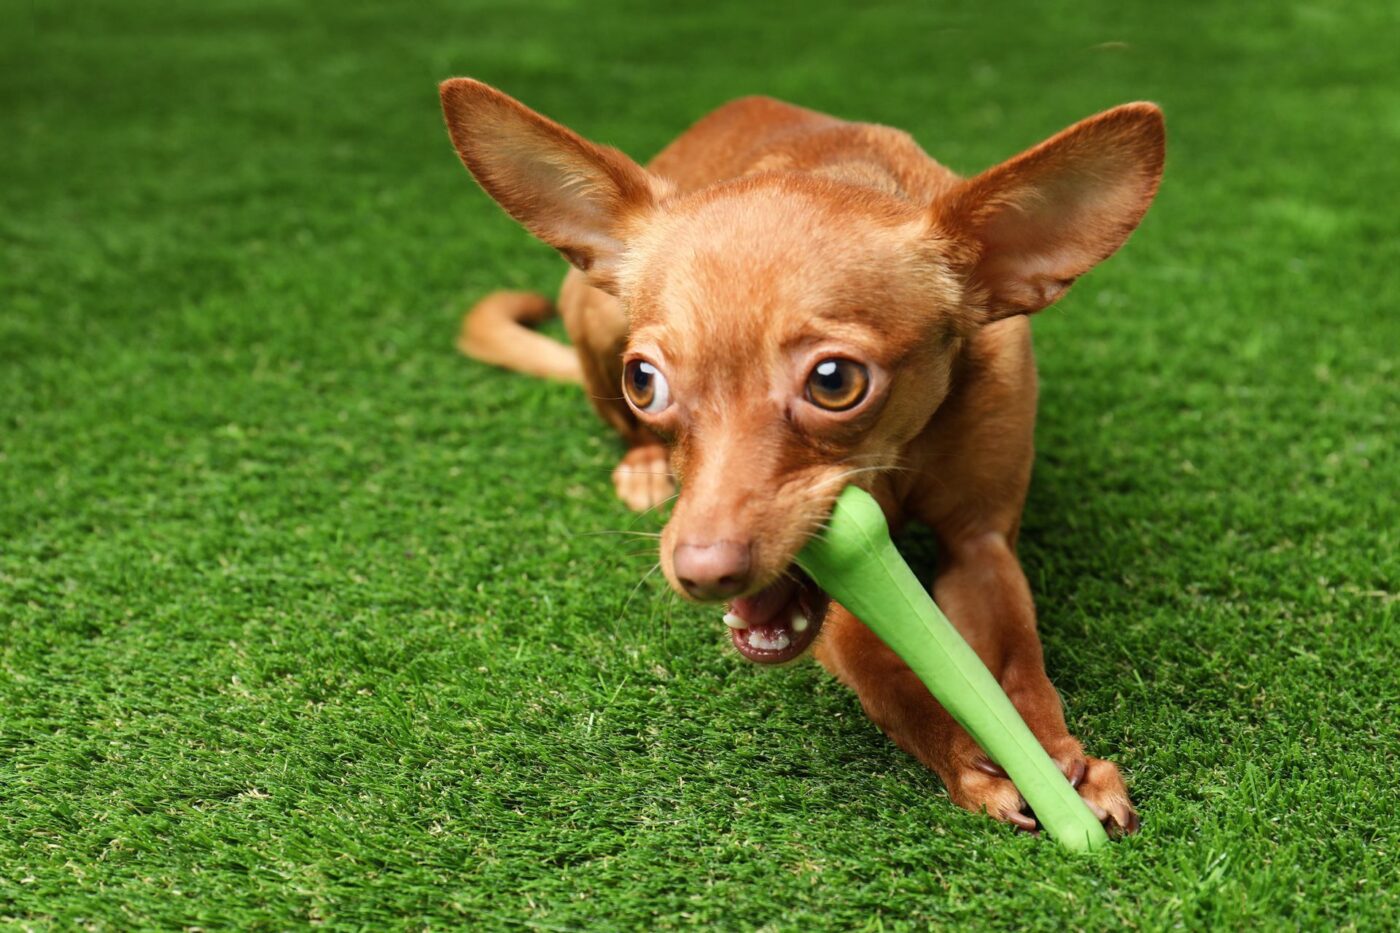 A small brown dog with large ears is lying on a green grassy surface, possibly in an outdoor area in Atlantic Beach, chewing on a green celery stalk. The dog's eyes are wide open, and it looks focused on the celery.